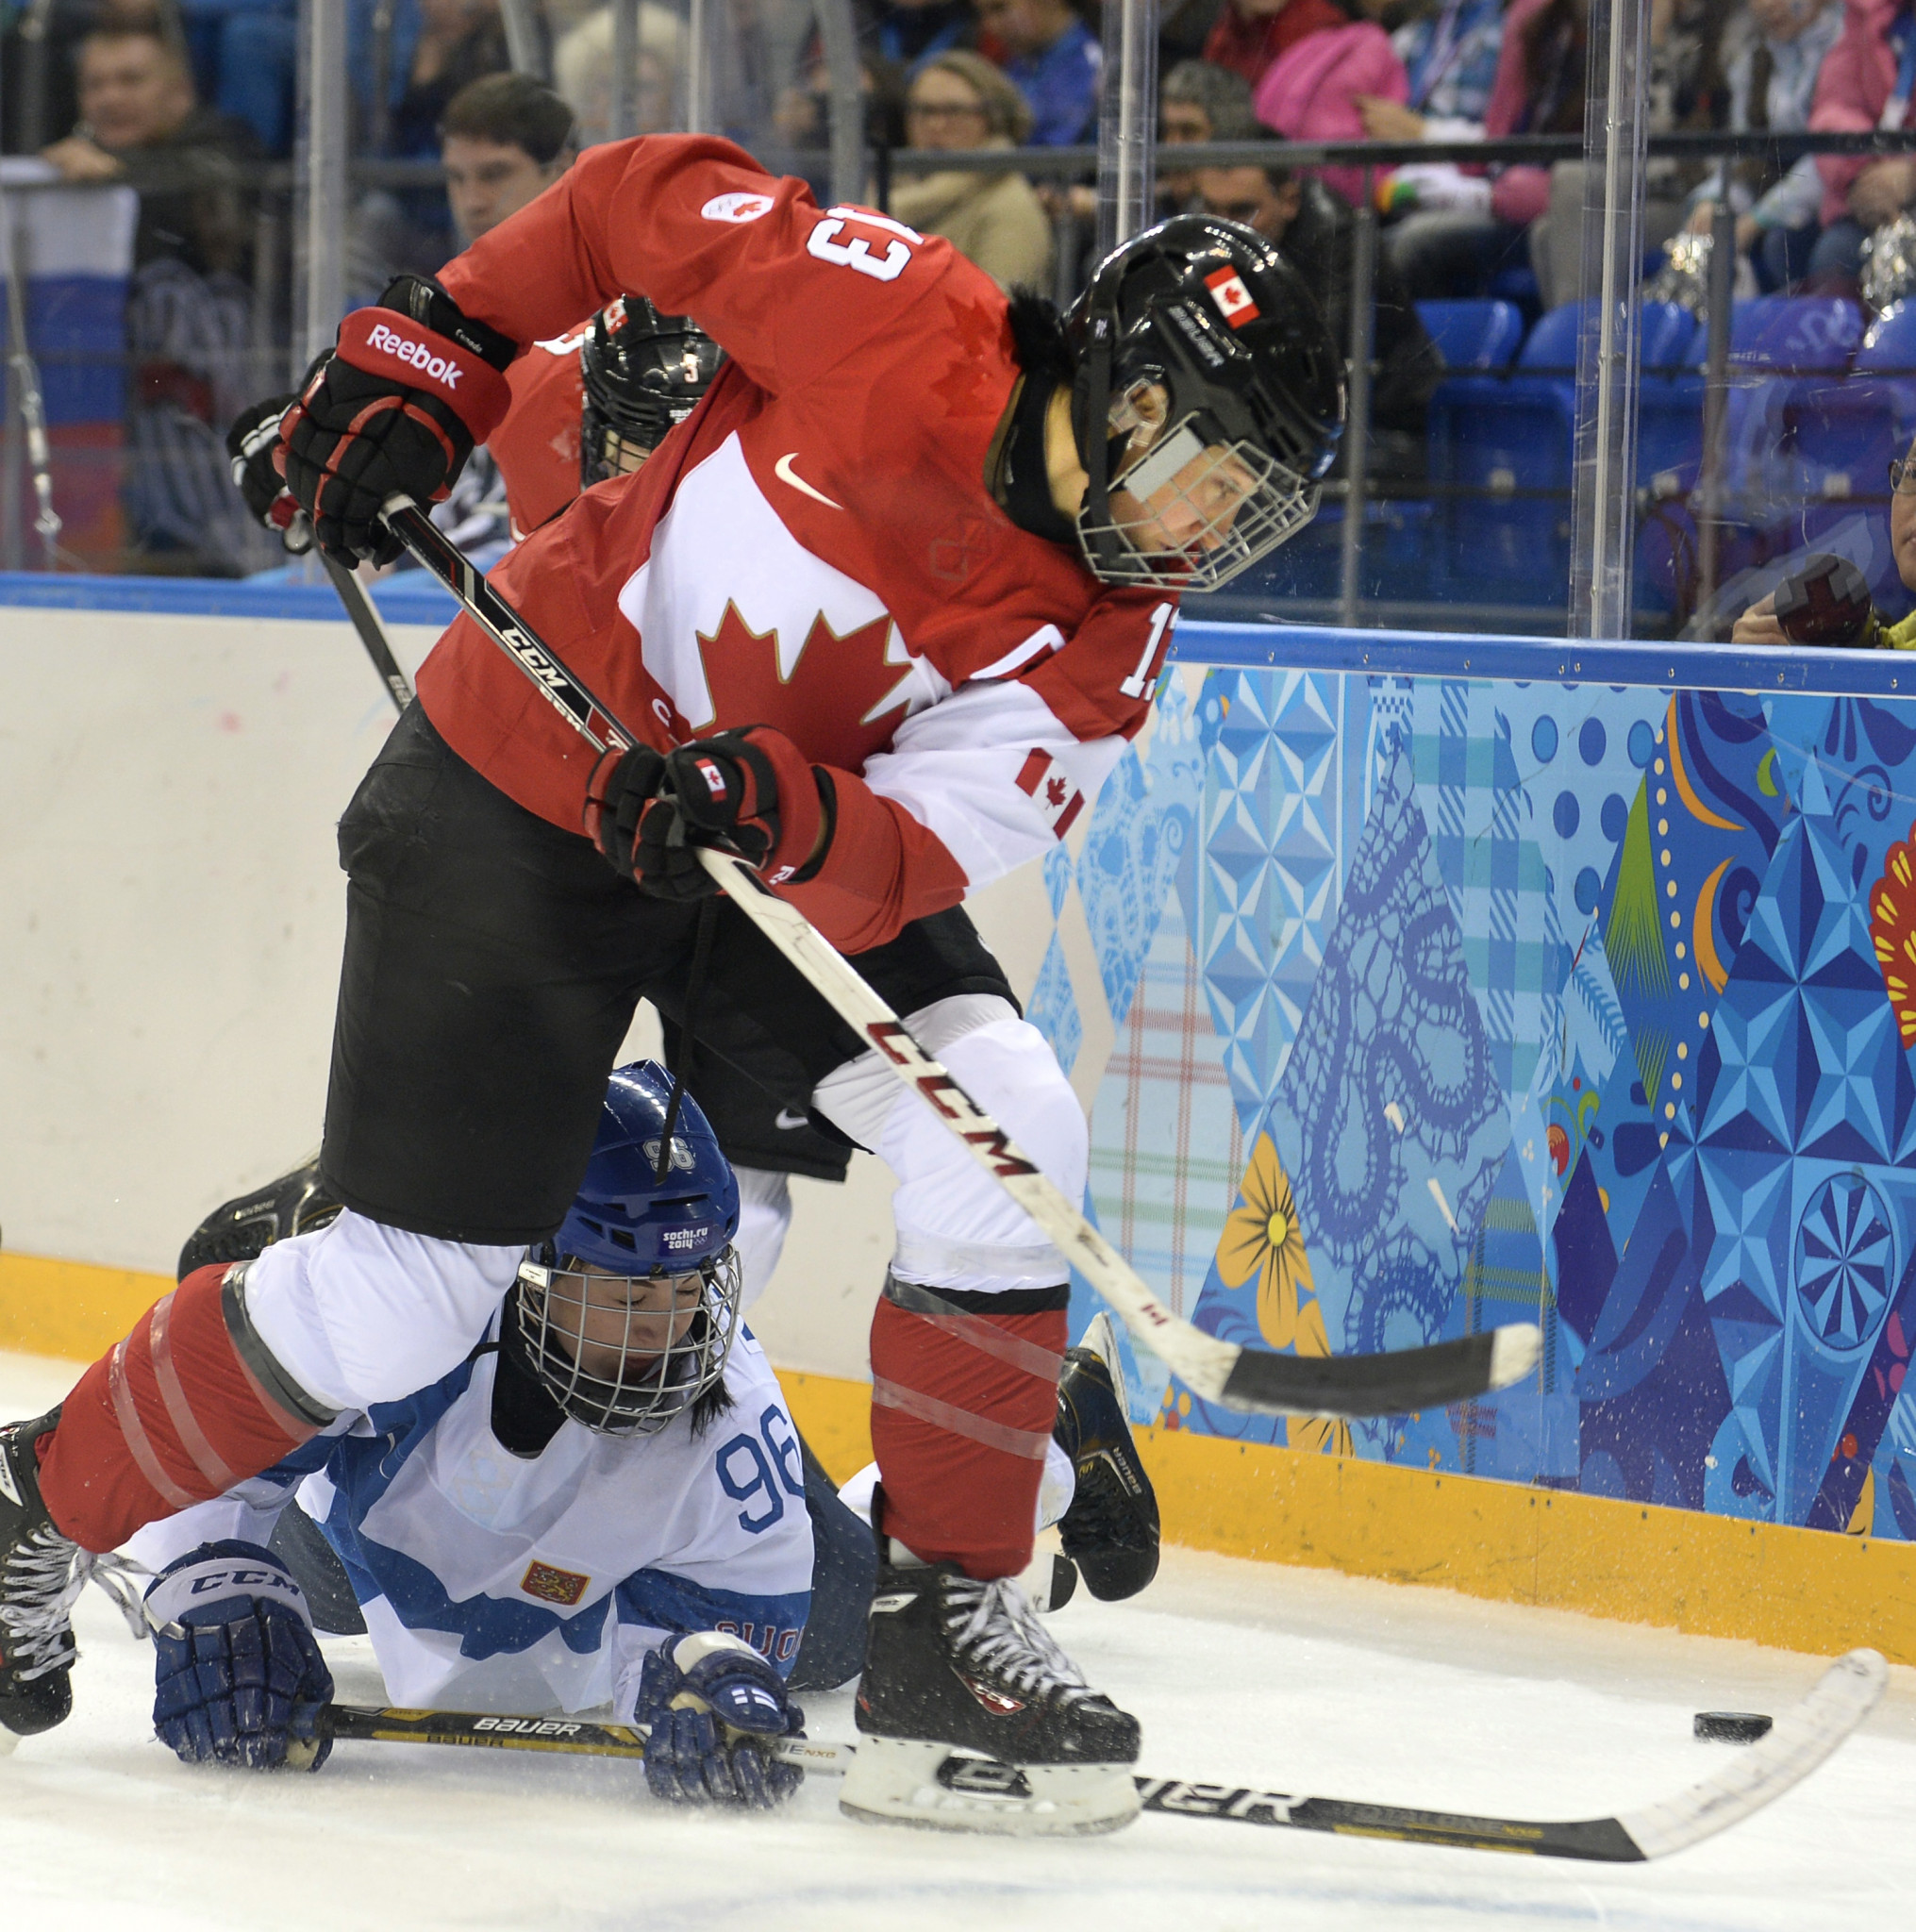 Four-time Olympic ice hockey champion Caroline Ouellette has announced her retirement from the sport ©Getty Images